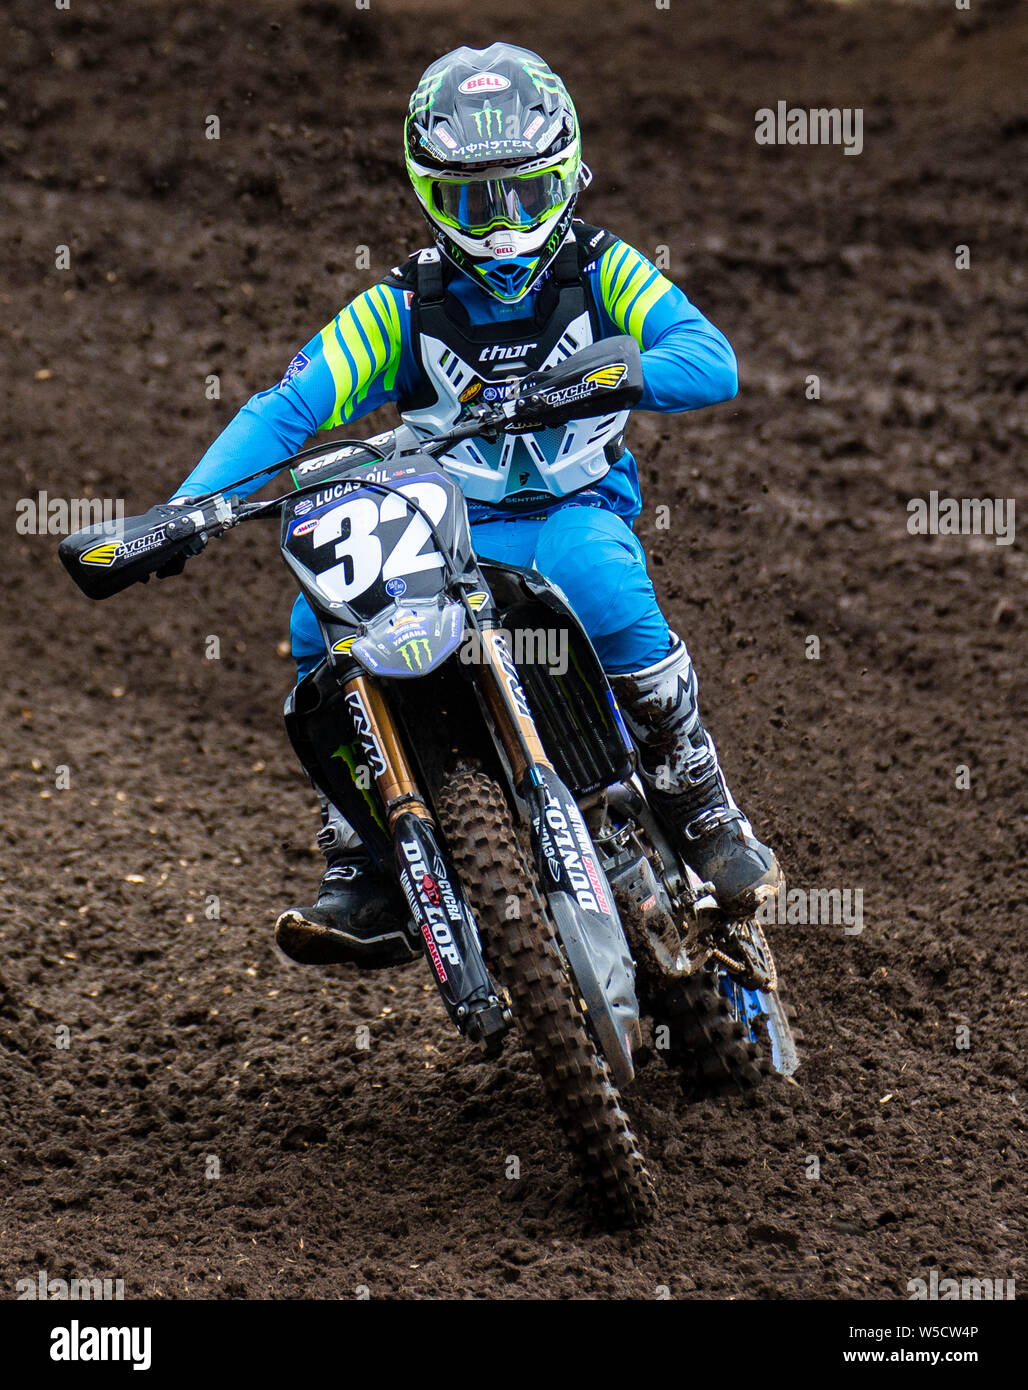 Washougal, USA. 27th July, 2019. # 32 Justin Cooper coming out of turn 2 during the Lucas Oil Pro Motocross Washougal Championship 250 class moto # 1 at Washougal MX park Washougal, WA Thurman James/CSM/Alamy Live News Stock Photo